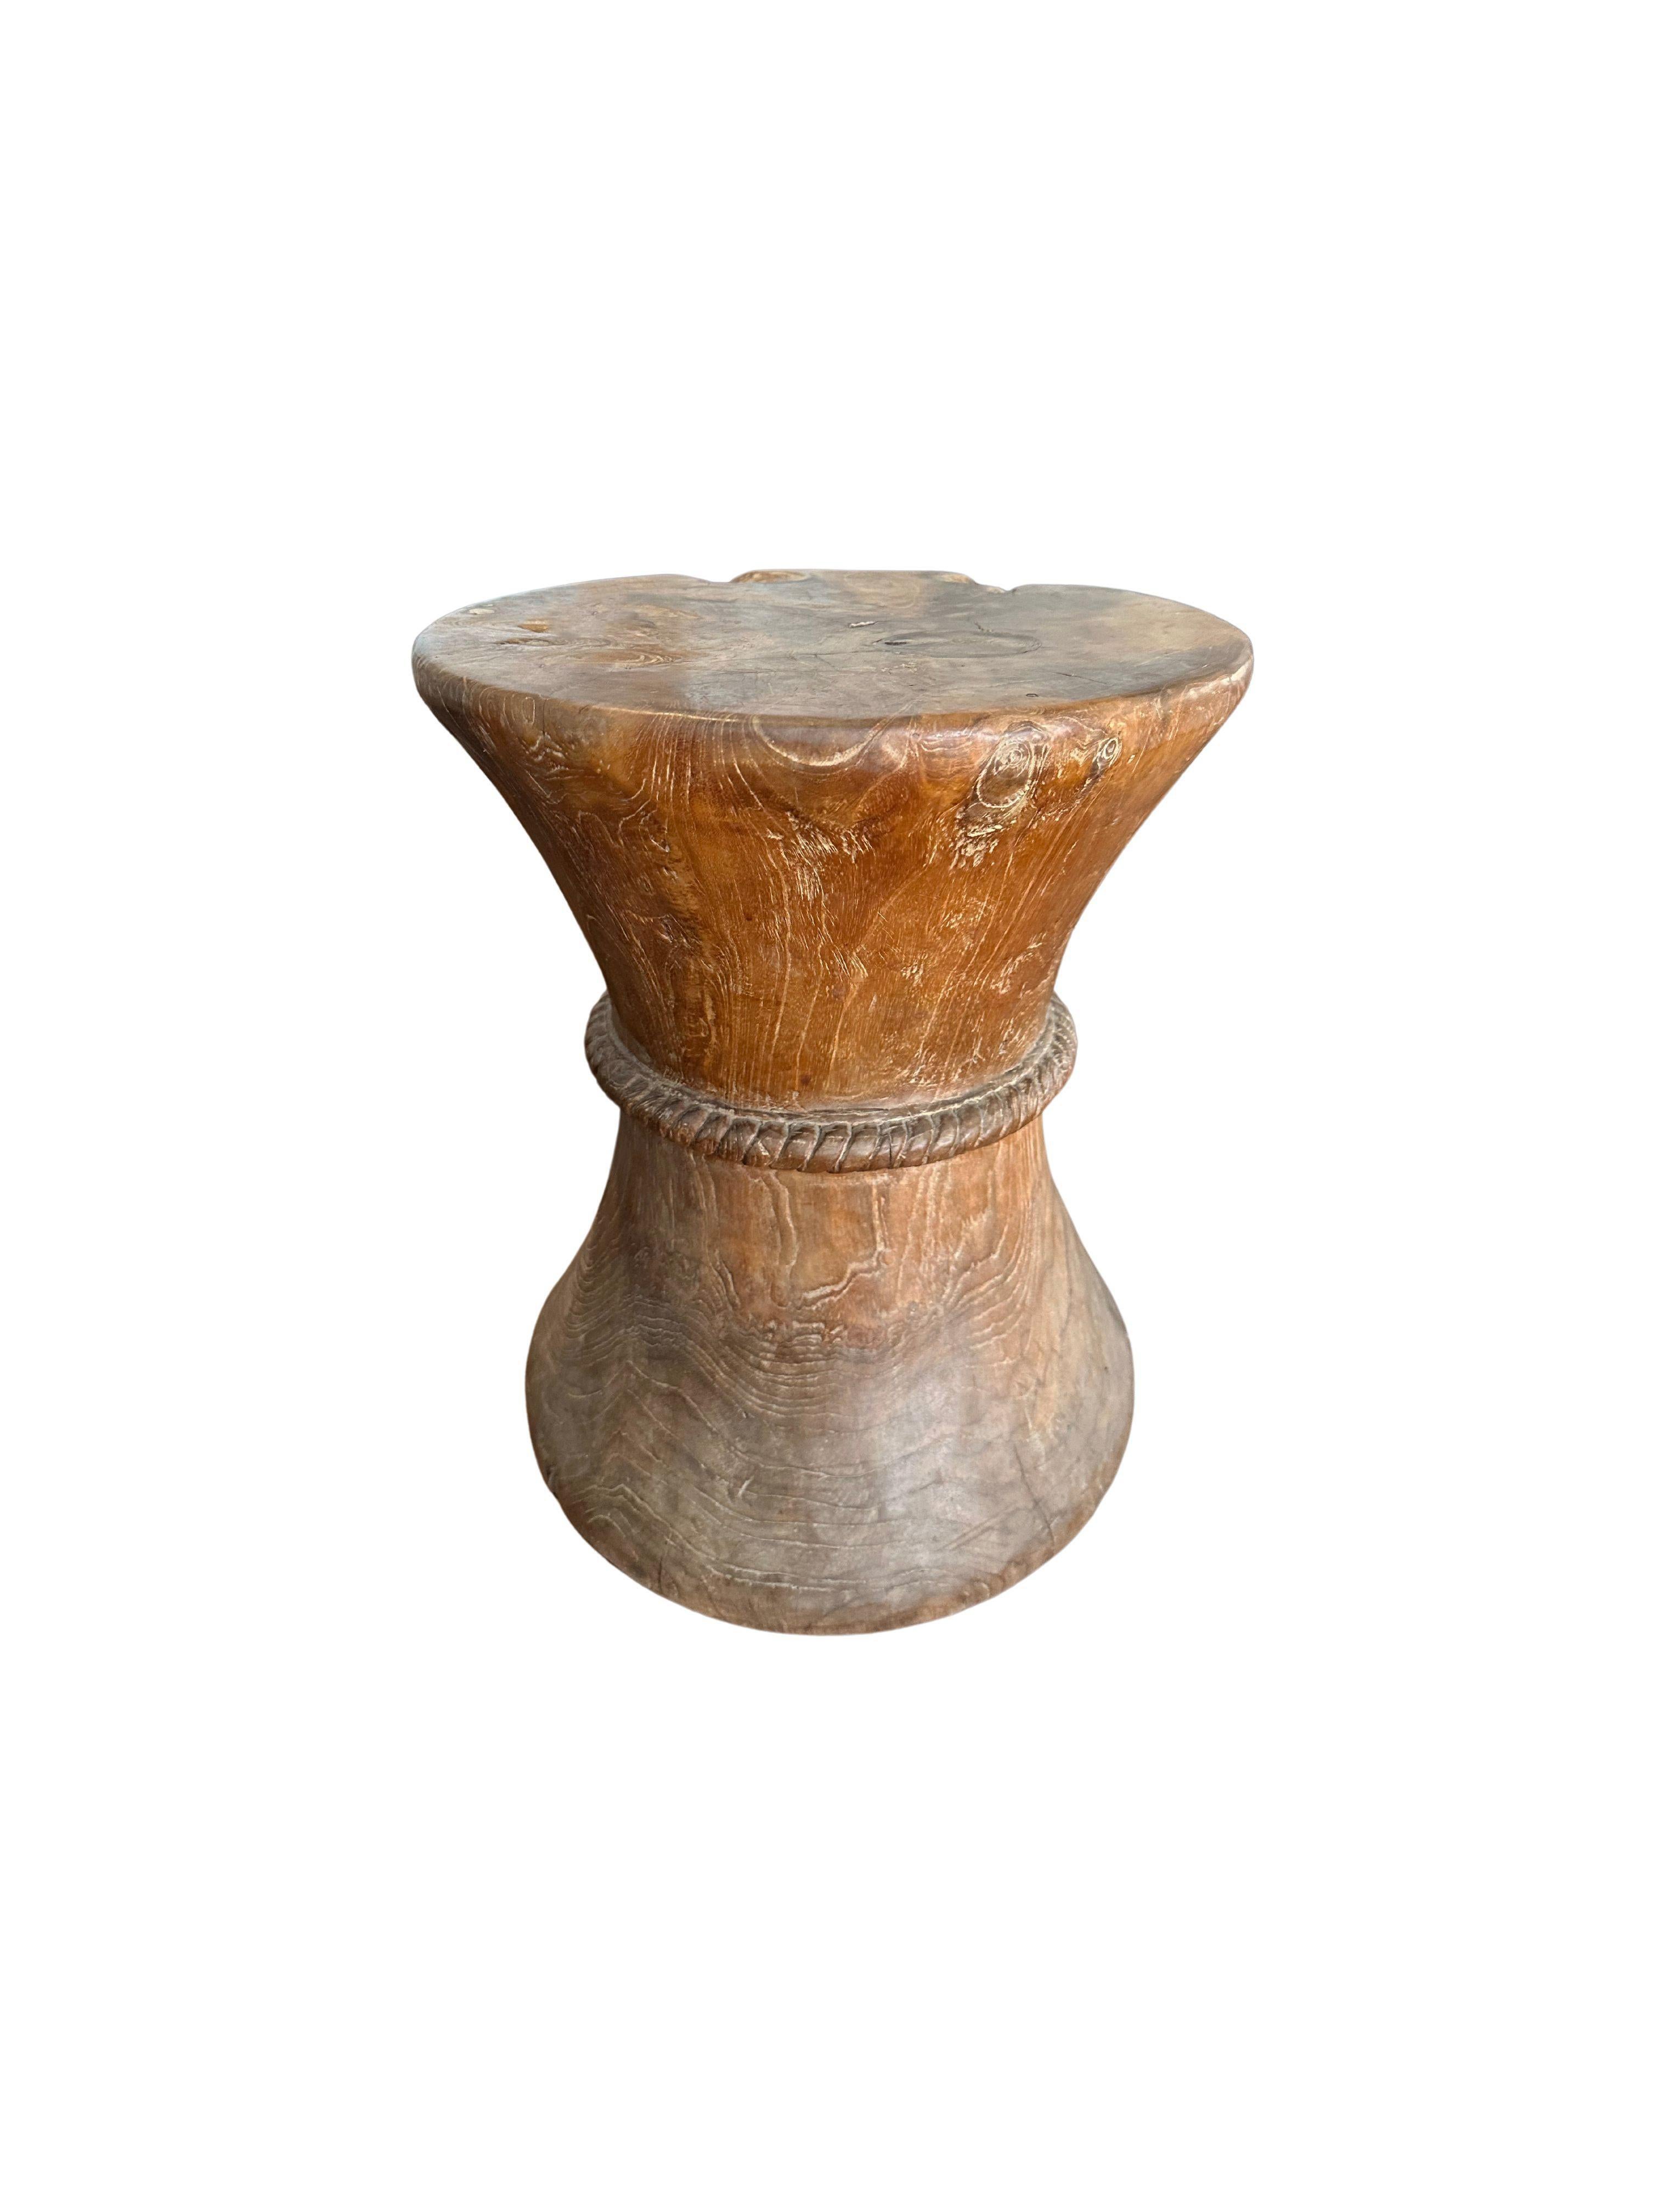 A wonderfully sculptural solid teak side table with carved detailing at its center. The mix of wood textures and shades add to its charm.

This is a made to order item and the images provided in this listing are a sample image of the finished